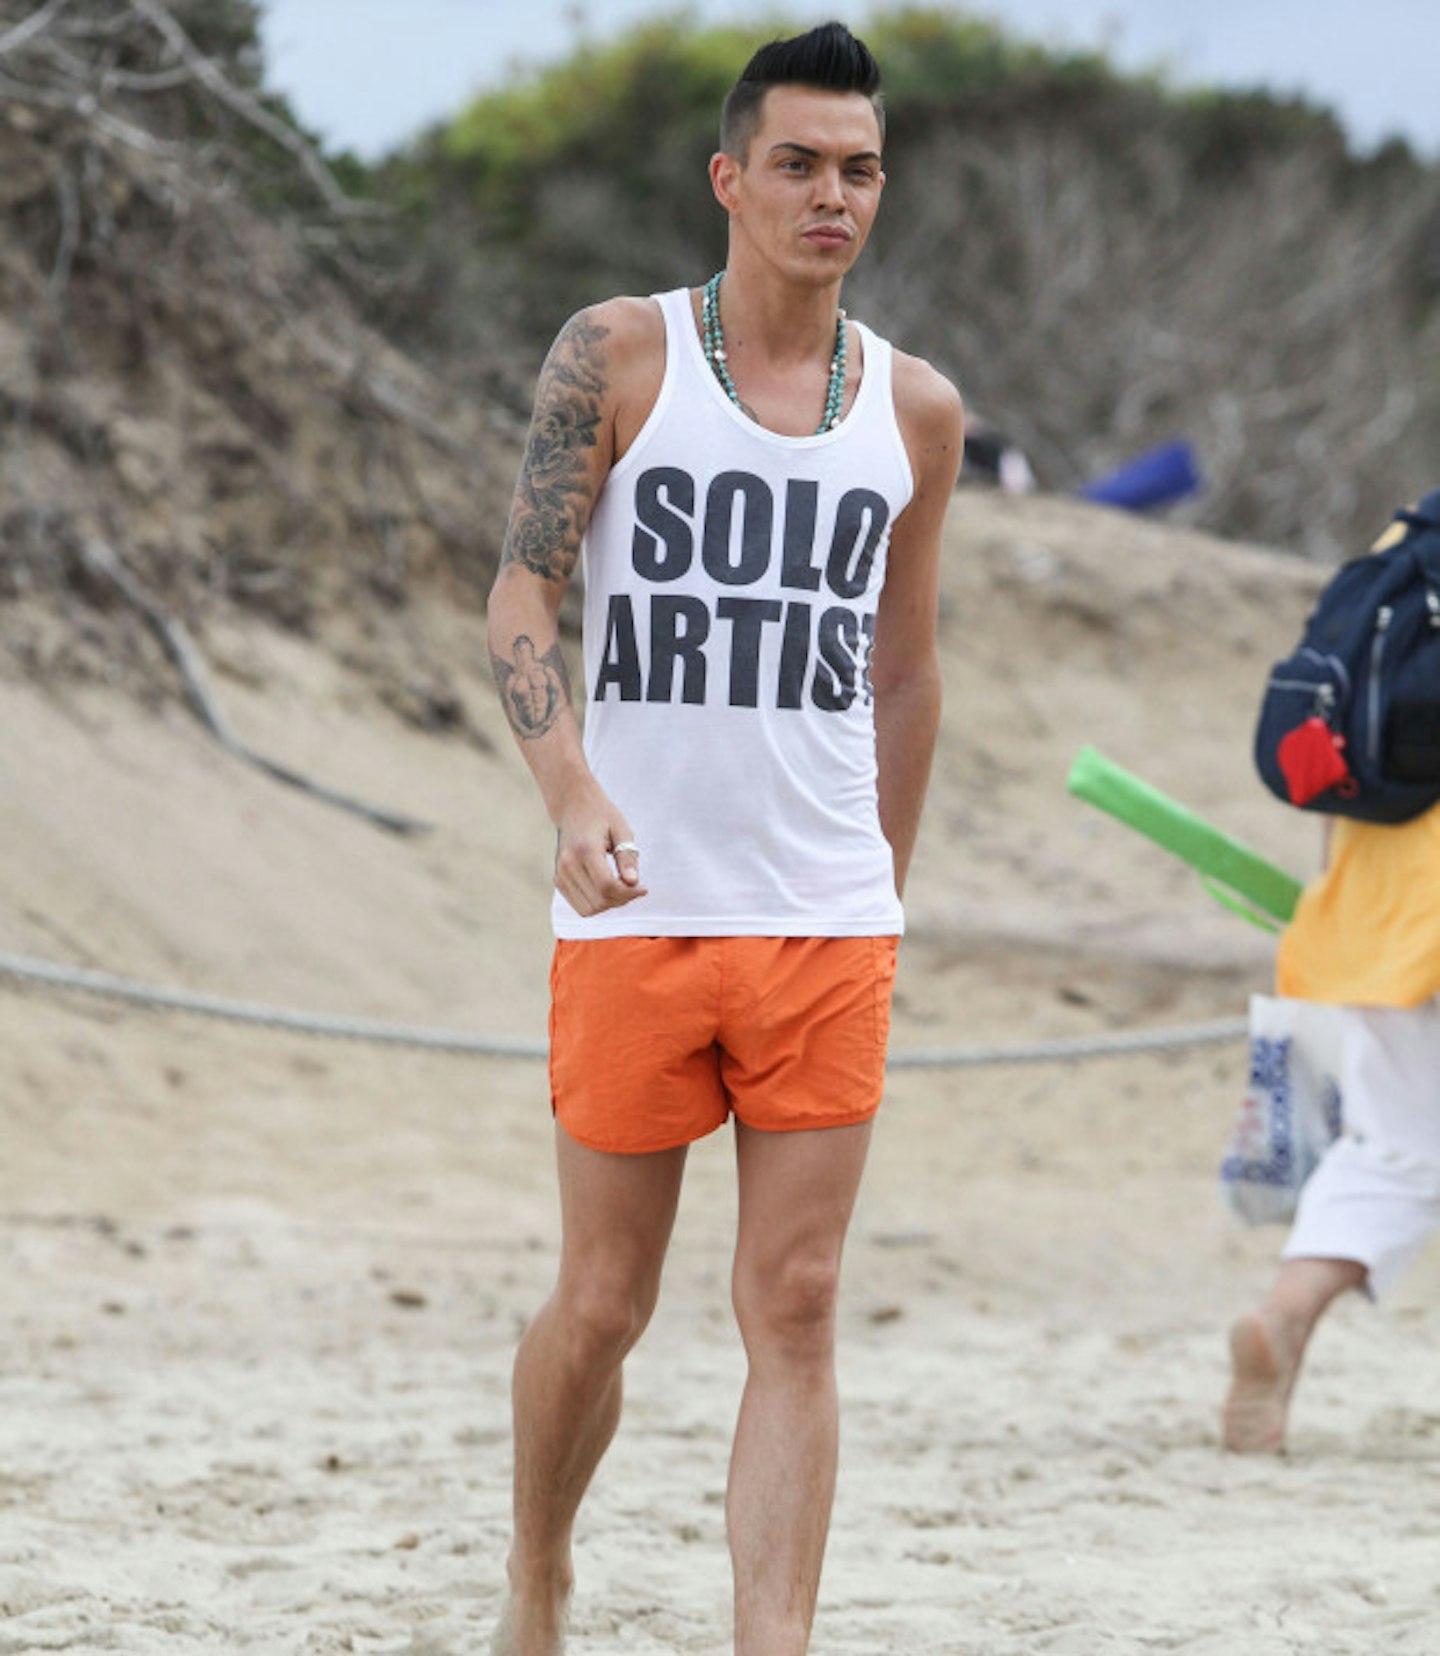 What lovely, normal beach attire...